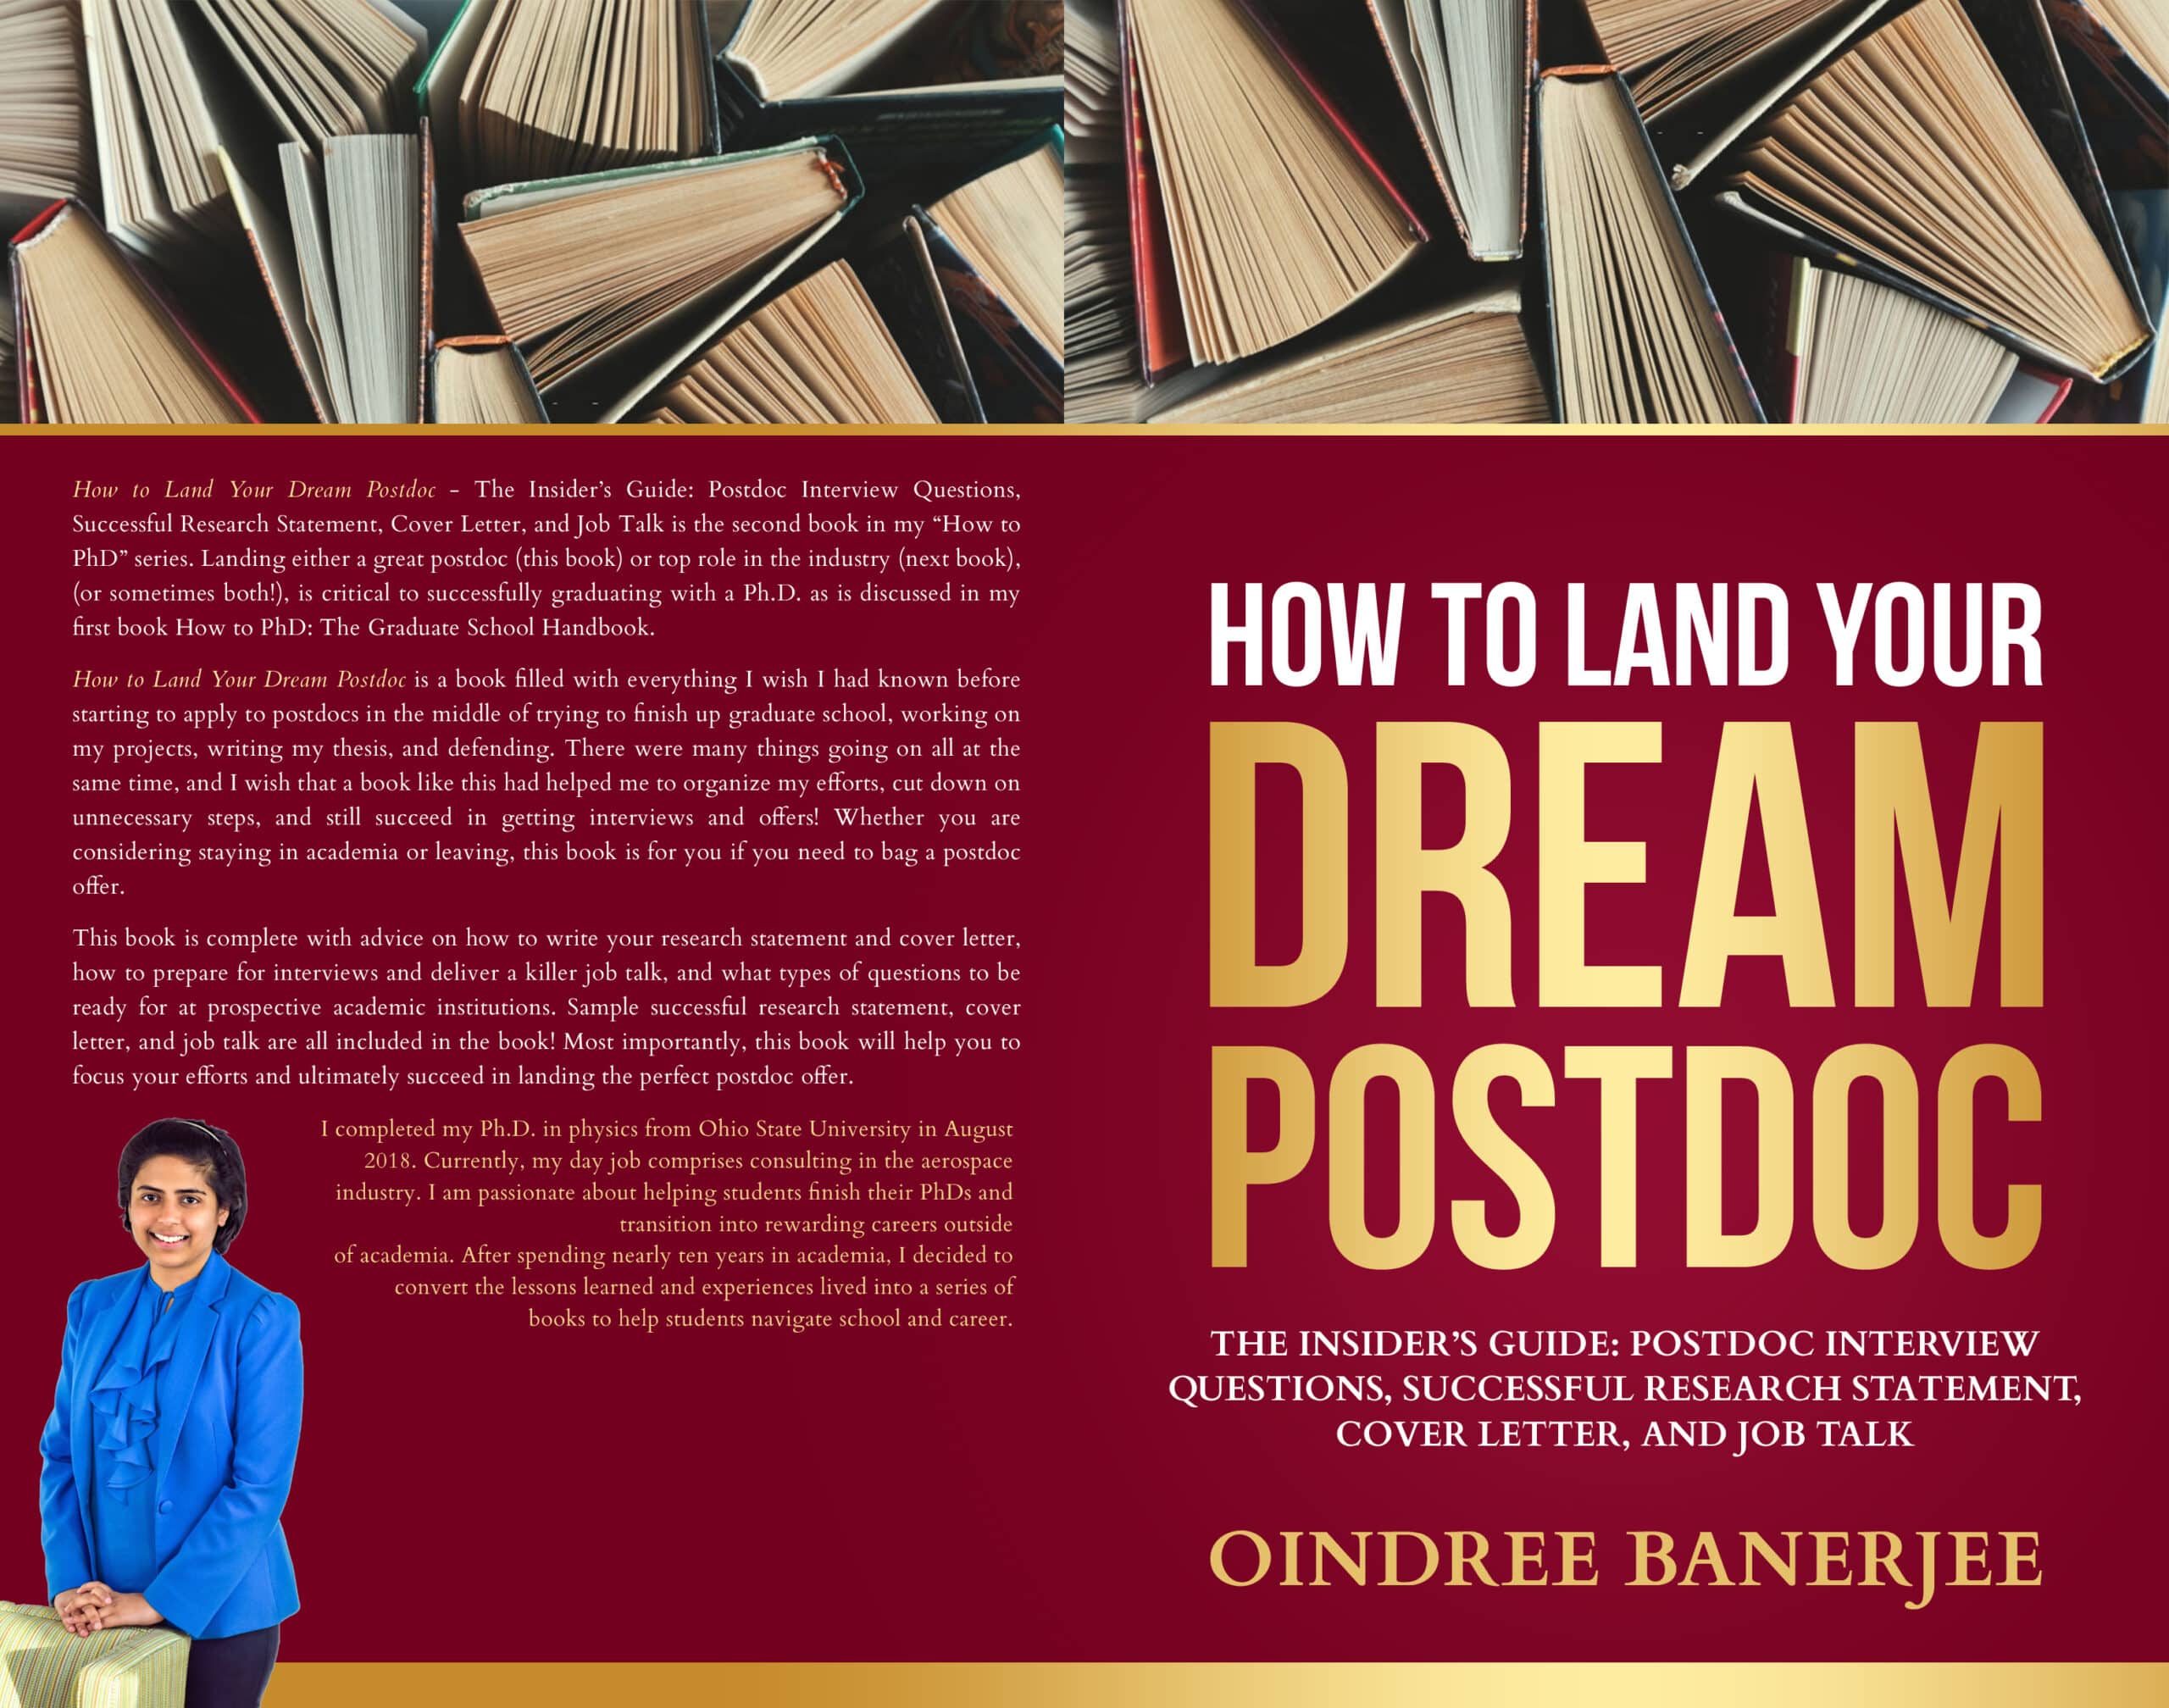 How to Postdoc Kindle Book Will be Free this New Year’s Week